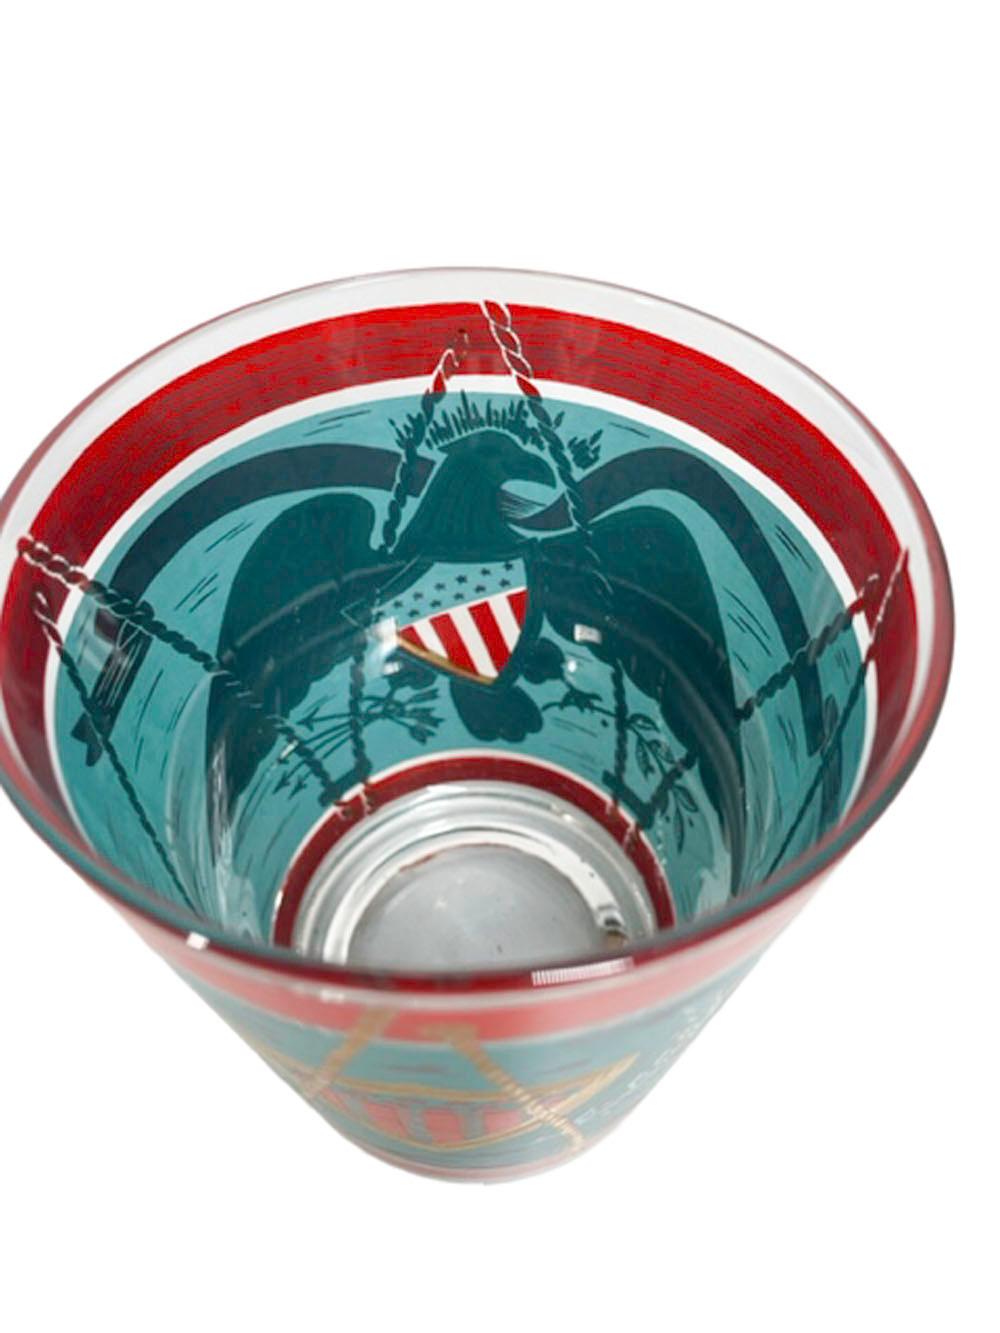 Mid-Century Modern rocks or double old fashioned glasses by Cera Glass decorated as a patriotic drum in teal and red enamel with a 22 karat gold eagle with a stars and stripes shield below a banner with the motto E Pluribus Unum.